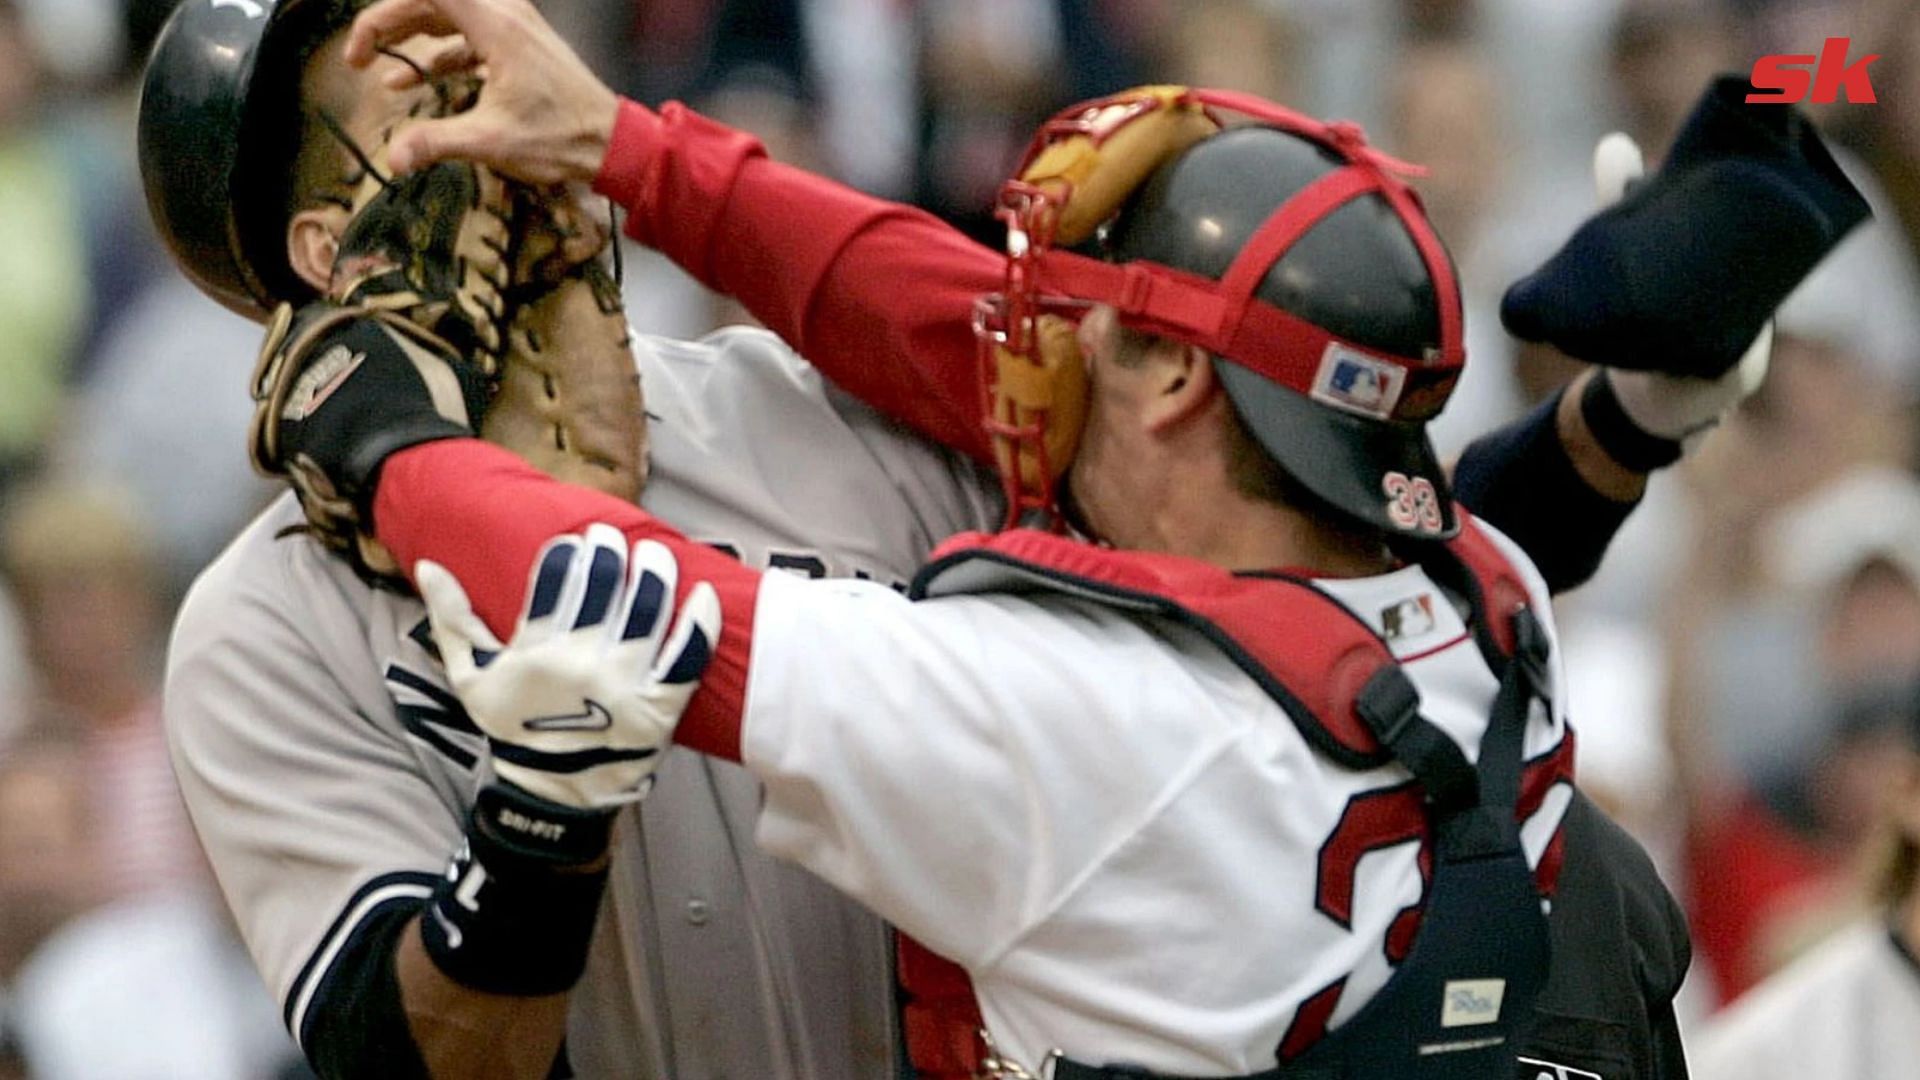 When former Yankees star Alex Rodriguez eluded questions about his infamous decade old brawl with Jason Varitek